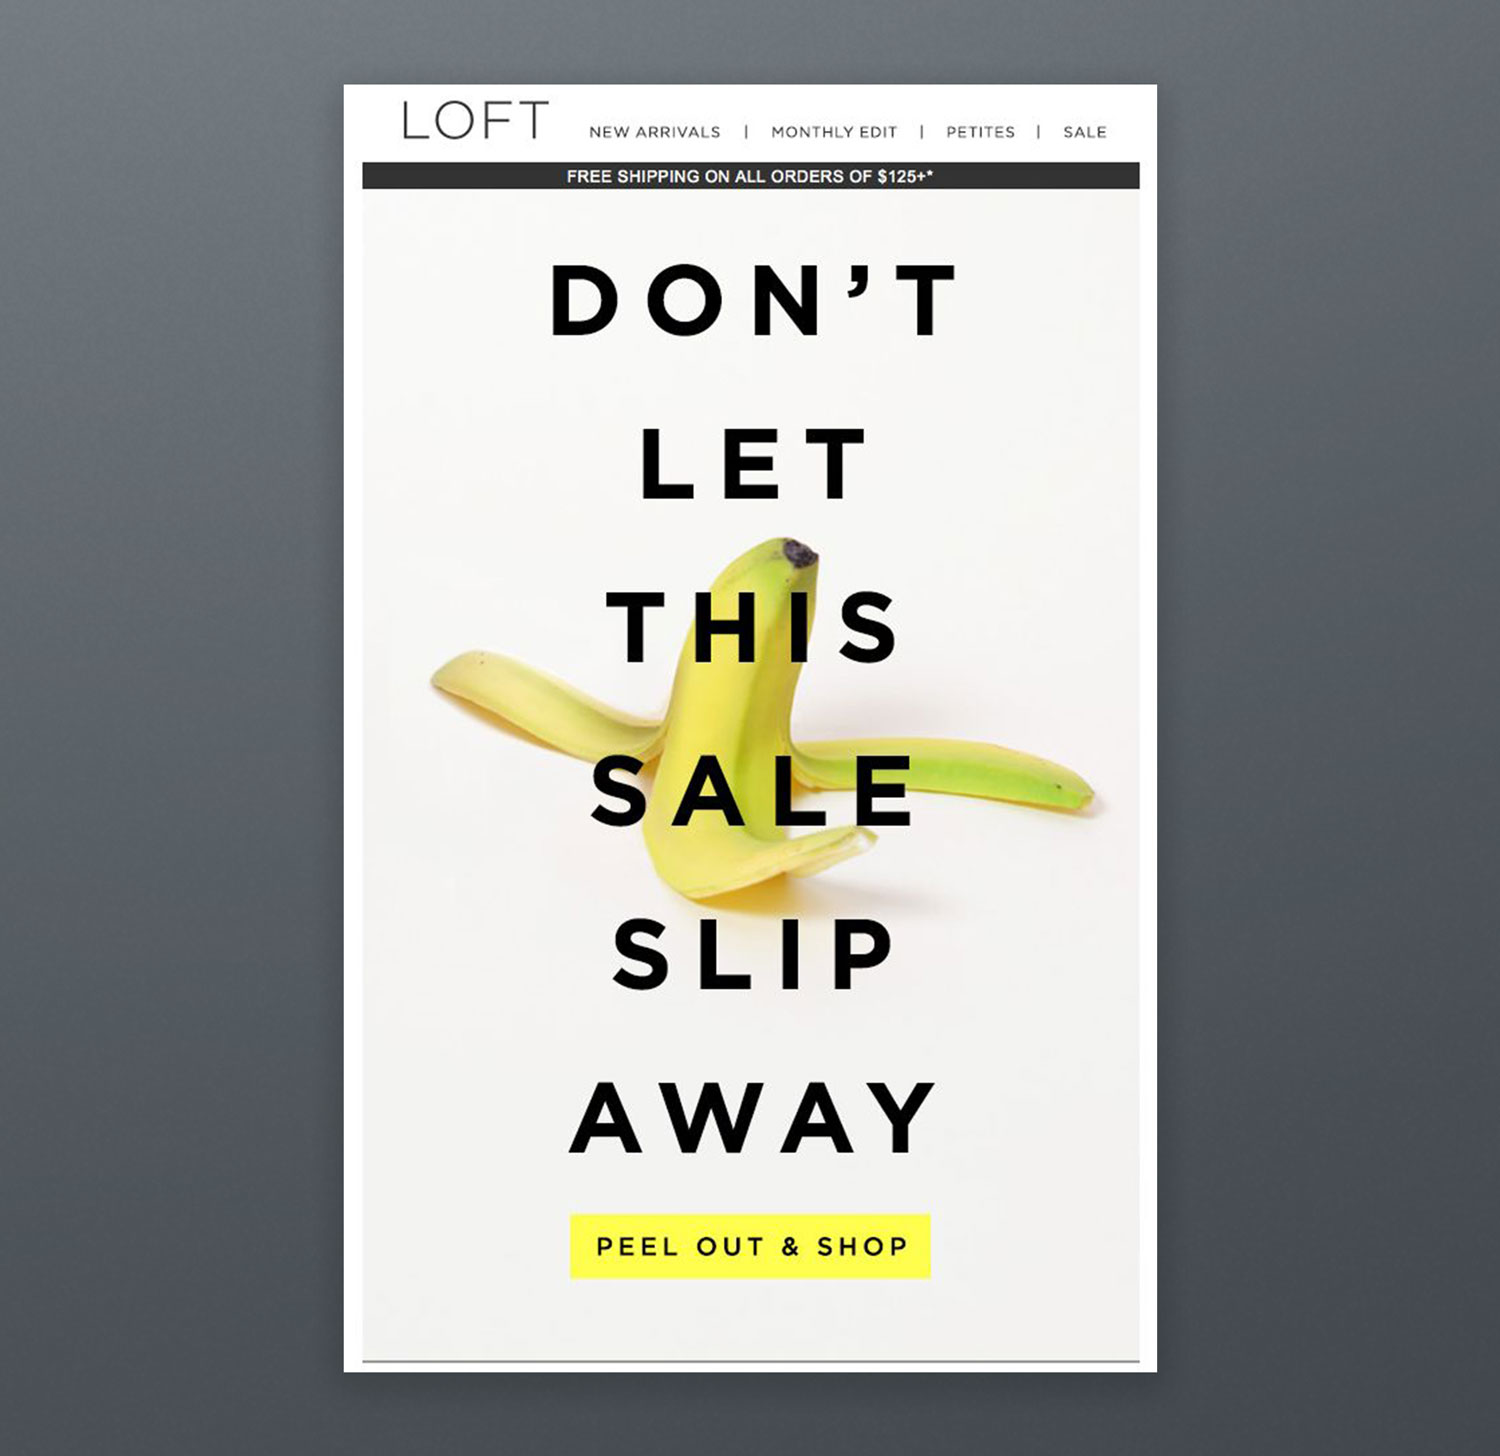 Loft Email Marketing Campaign